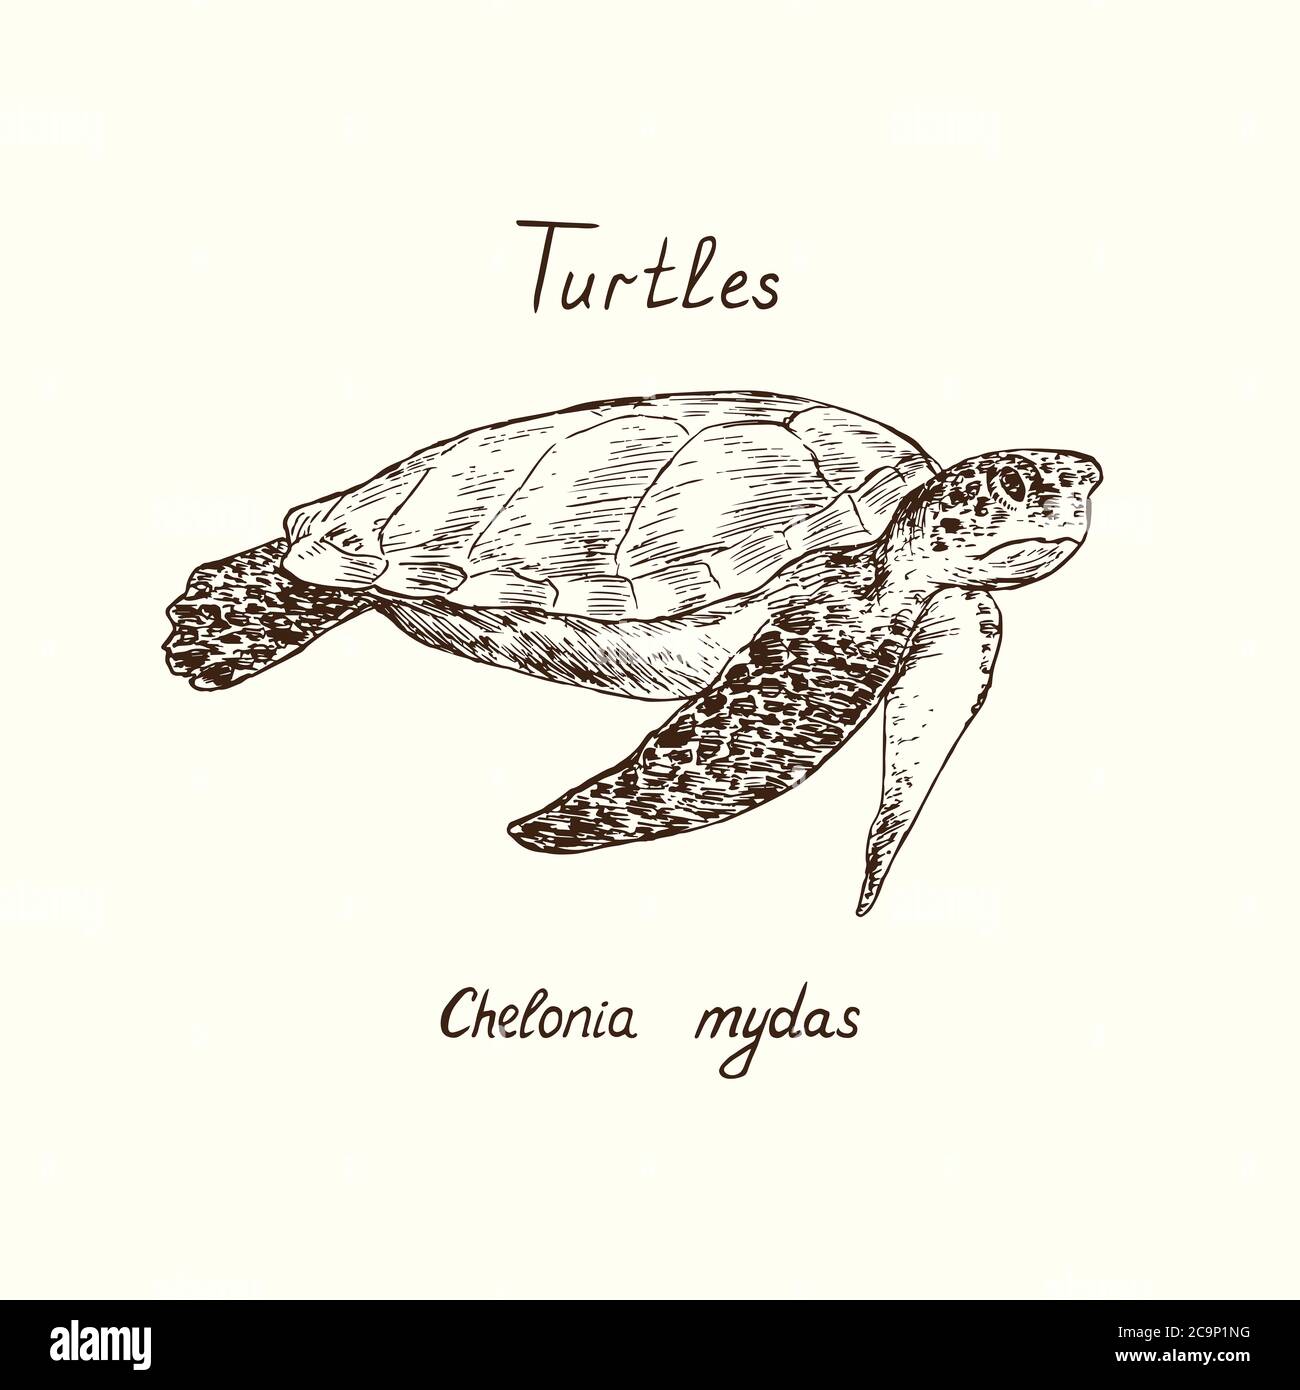 Tutles collection, green sea turtle (Chelonia mydas) hand drawn doodle, drawing sketch in gravure style Stock Photo